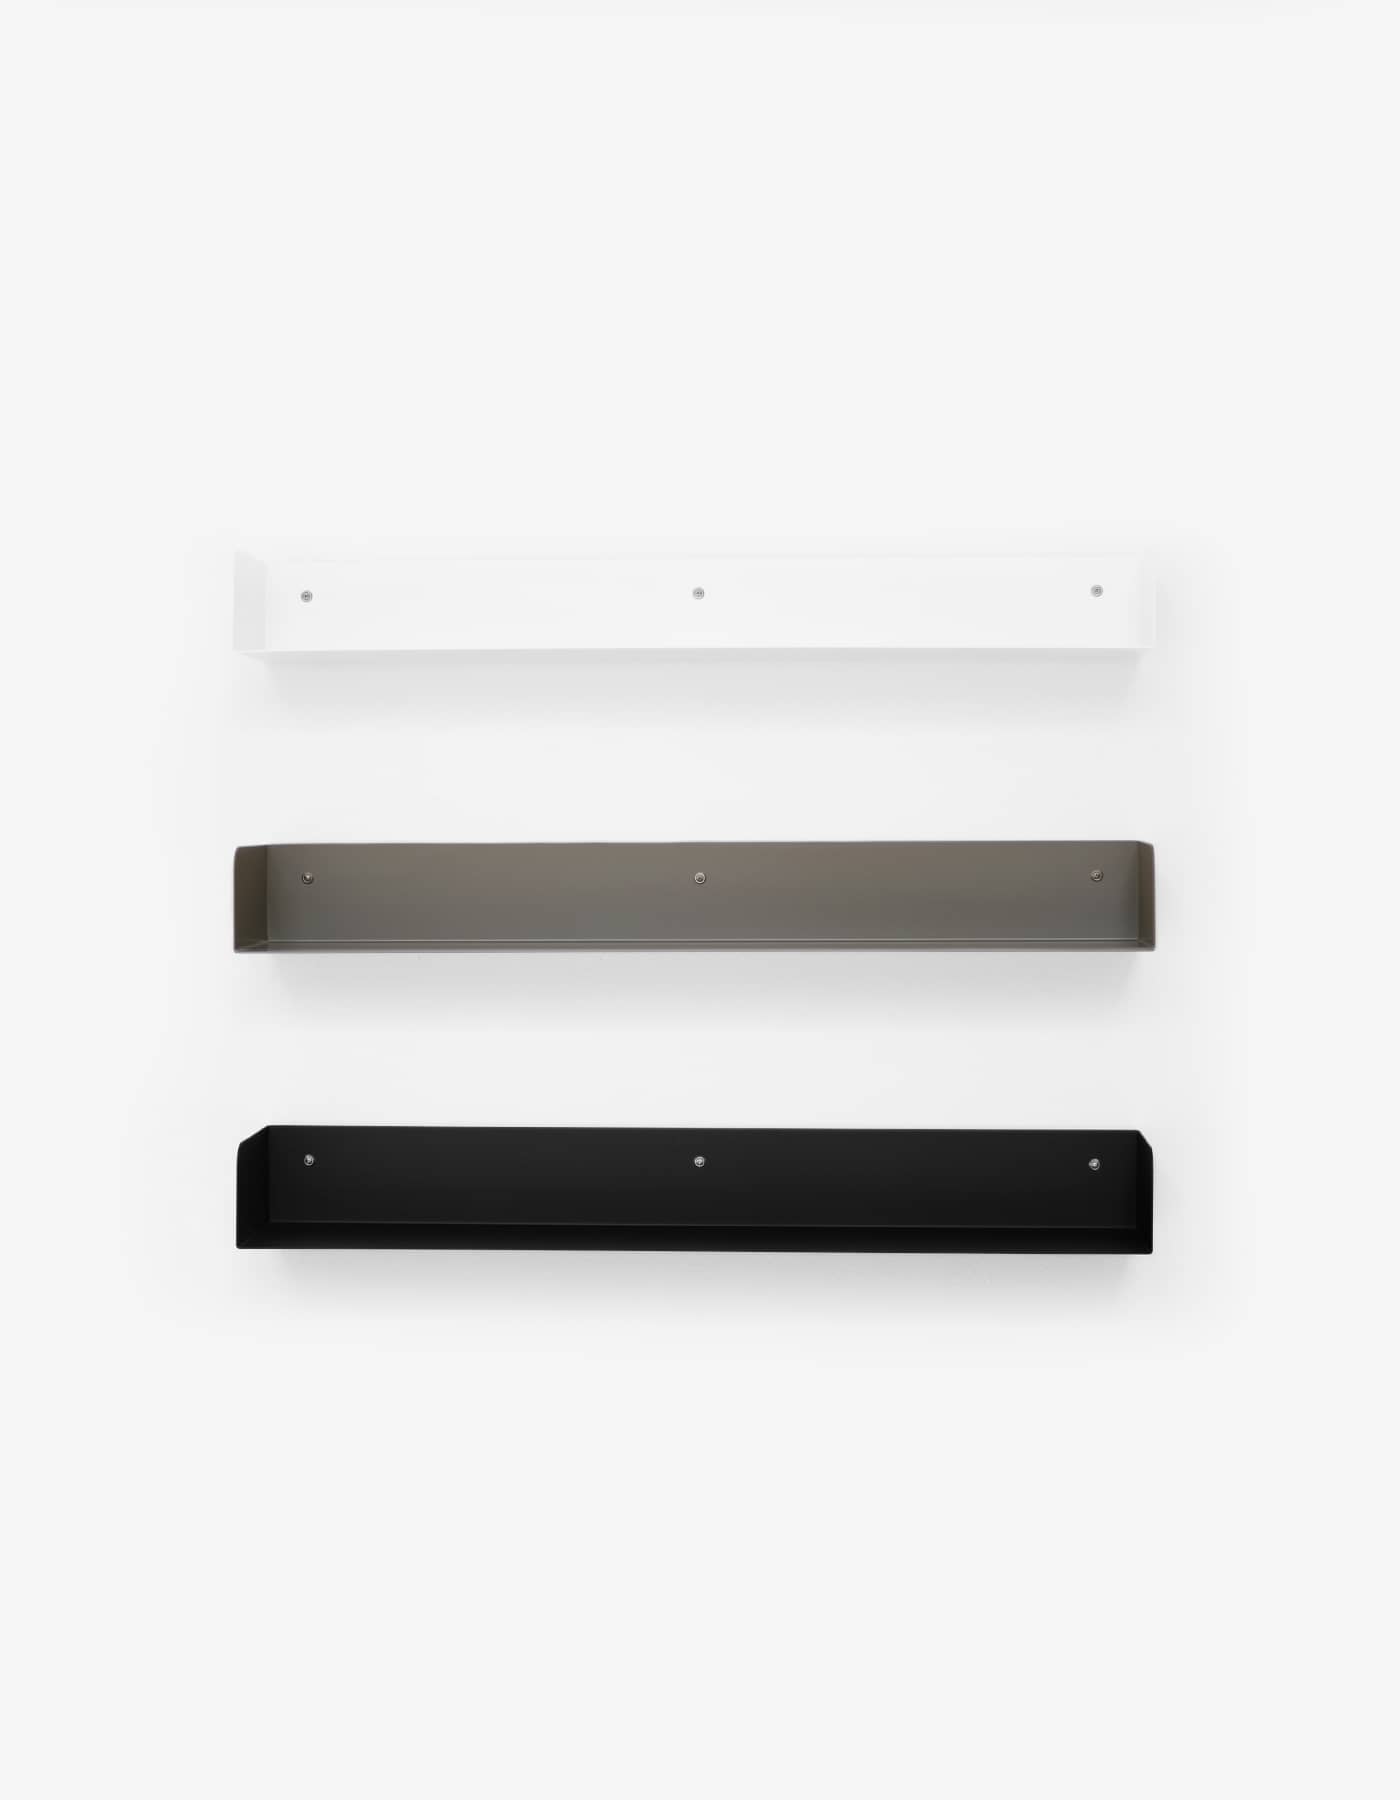 Poggibonsi shelf from Atelier Haussmann is made of  a 2 mm steel sheet and can be obtained in 3 different colors.